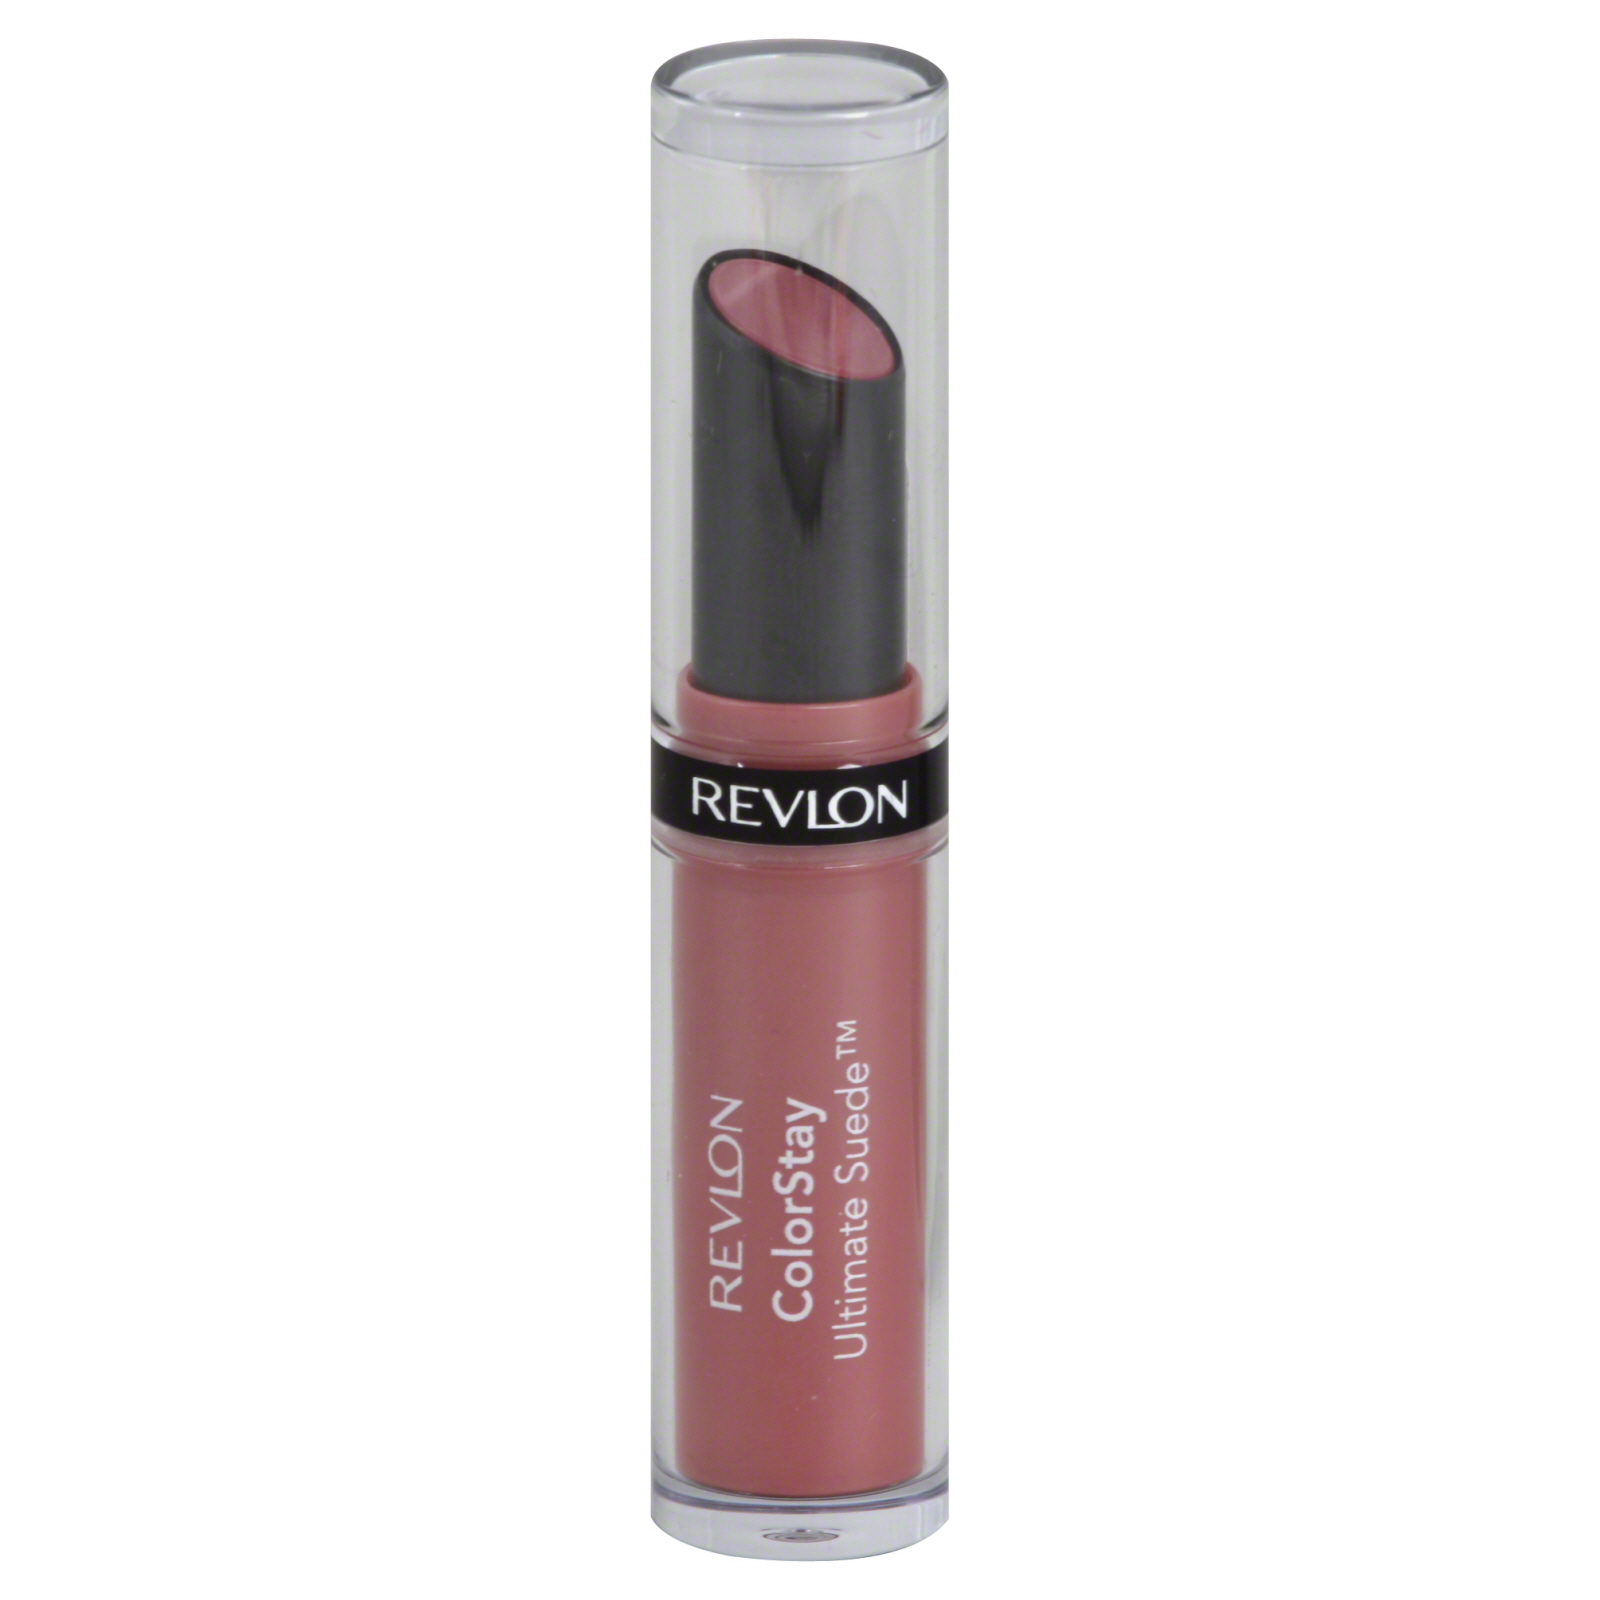 Revlon ColorStay Ultimate Suede Lipstick, Preview 070, 0